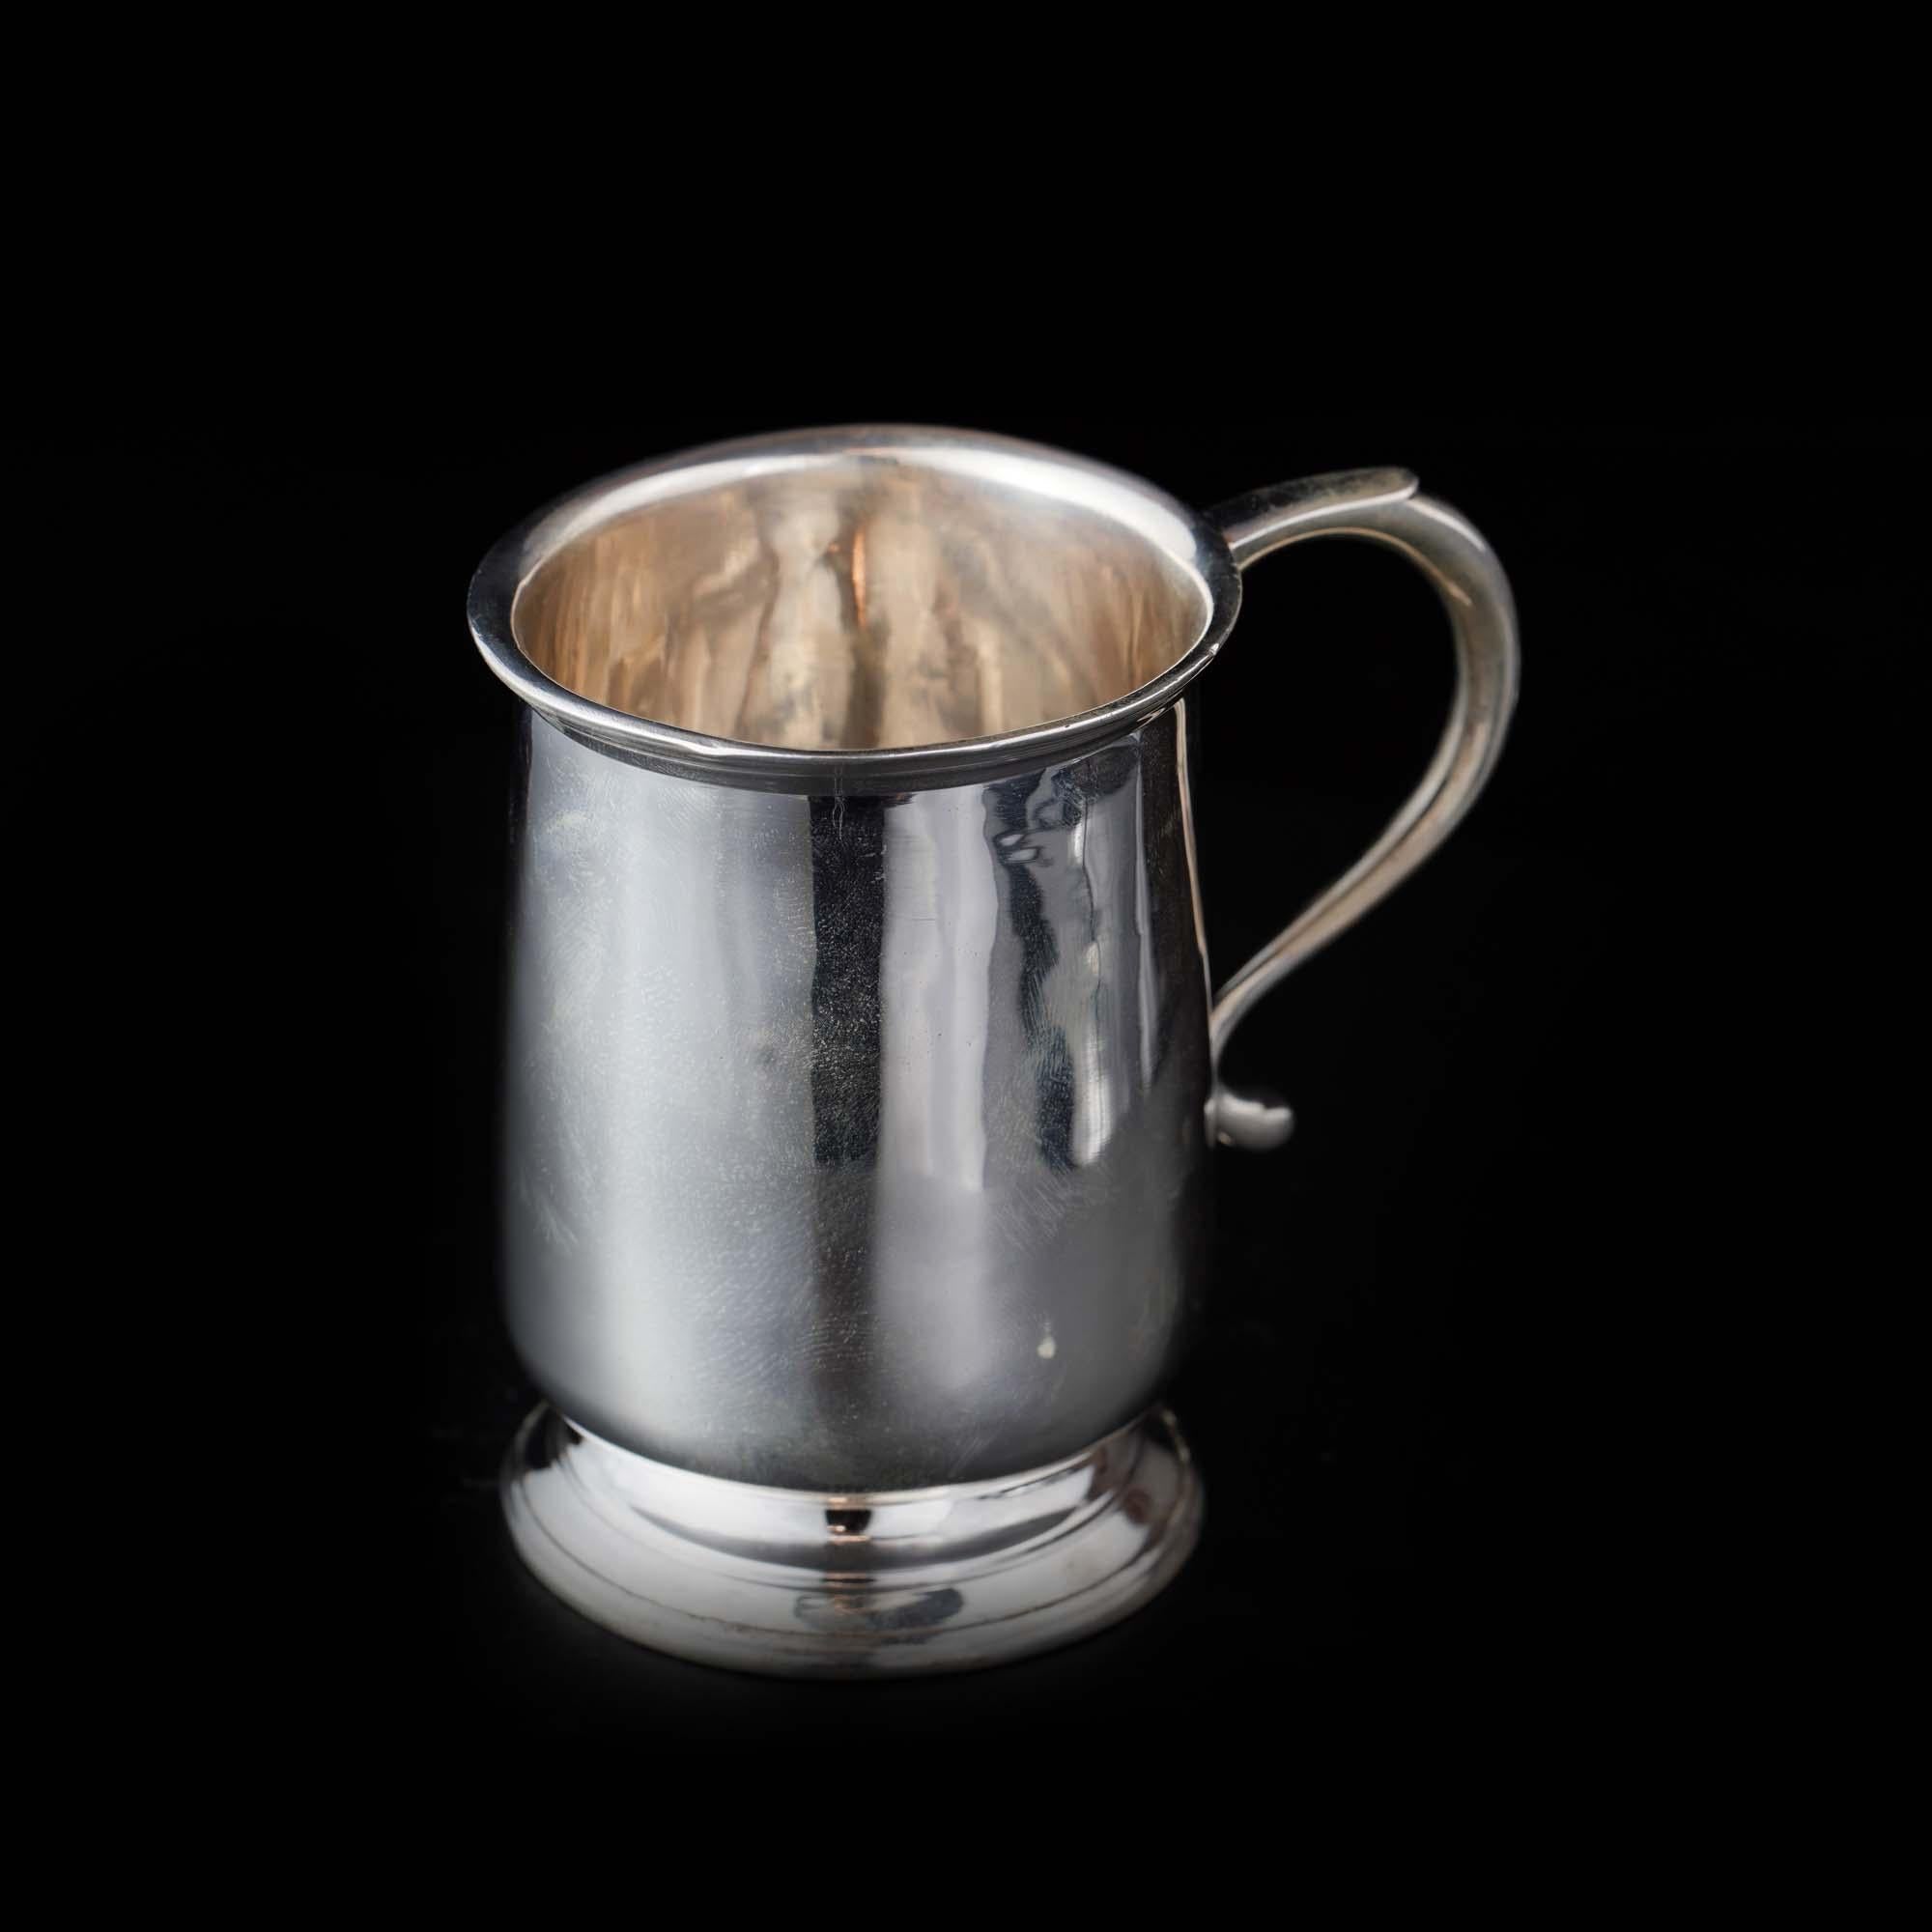 Vintage Sterling silver small mug. 
Maker: James Dixon & Sons Ltd
Made in Birmingham, 1925
Fully hallmarked.

Dimensions - 
Length x width x height: 9 x 6.5 x 8.7 cm 
Weight : 115 grams

Condition : General wear and tear, good condition